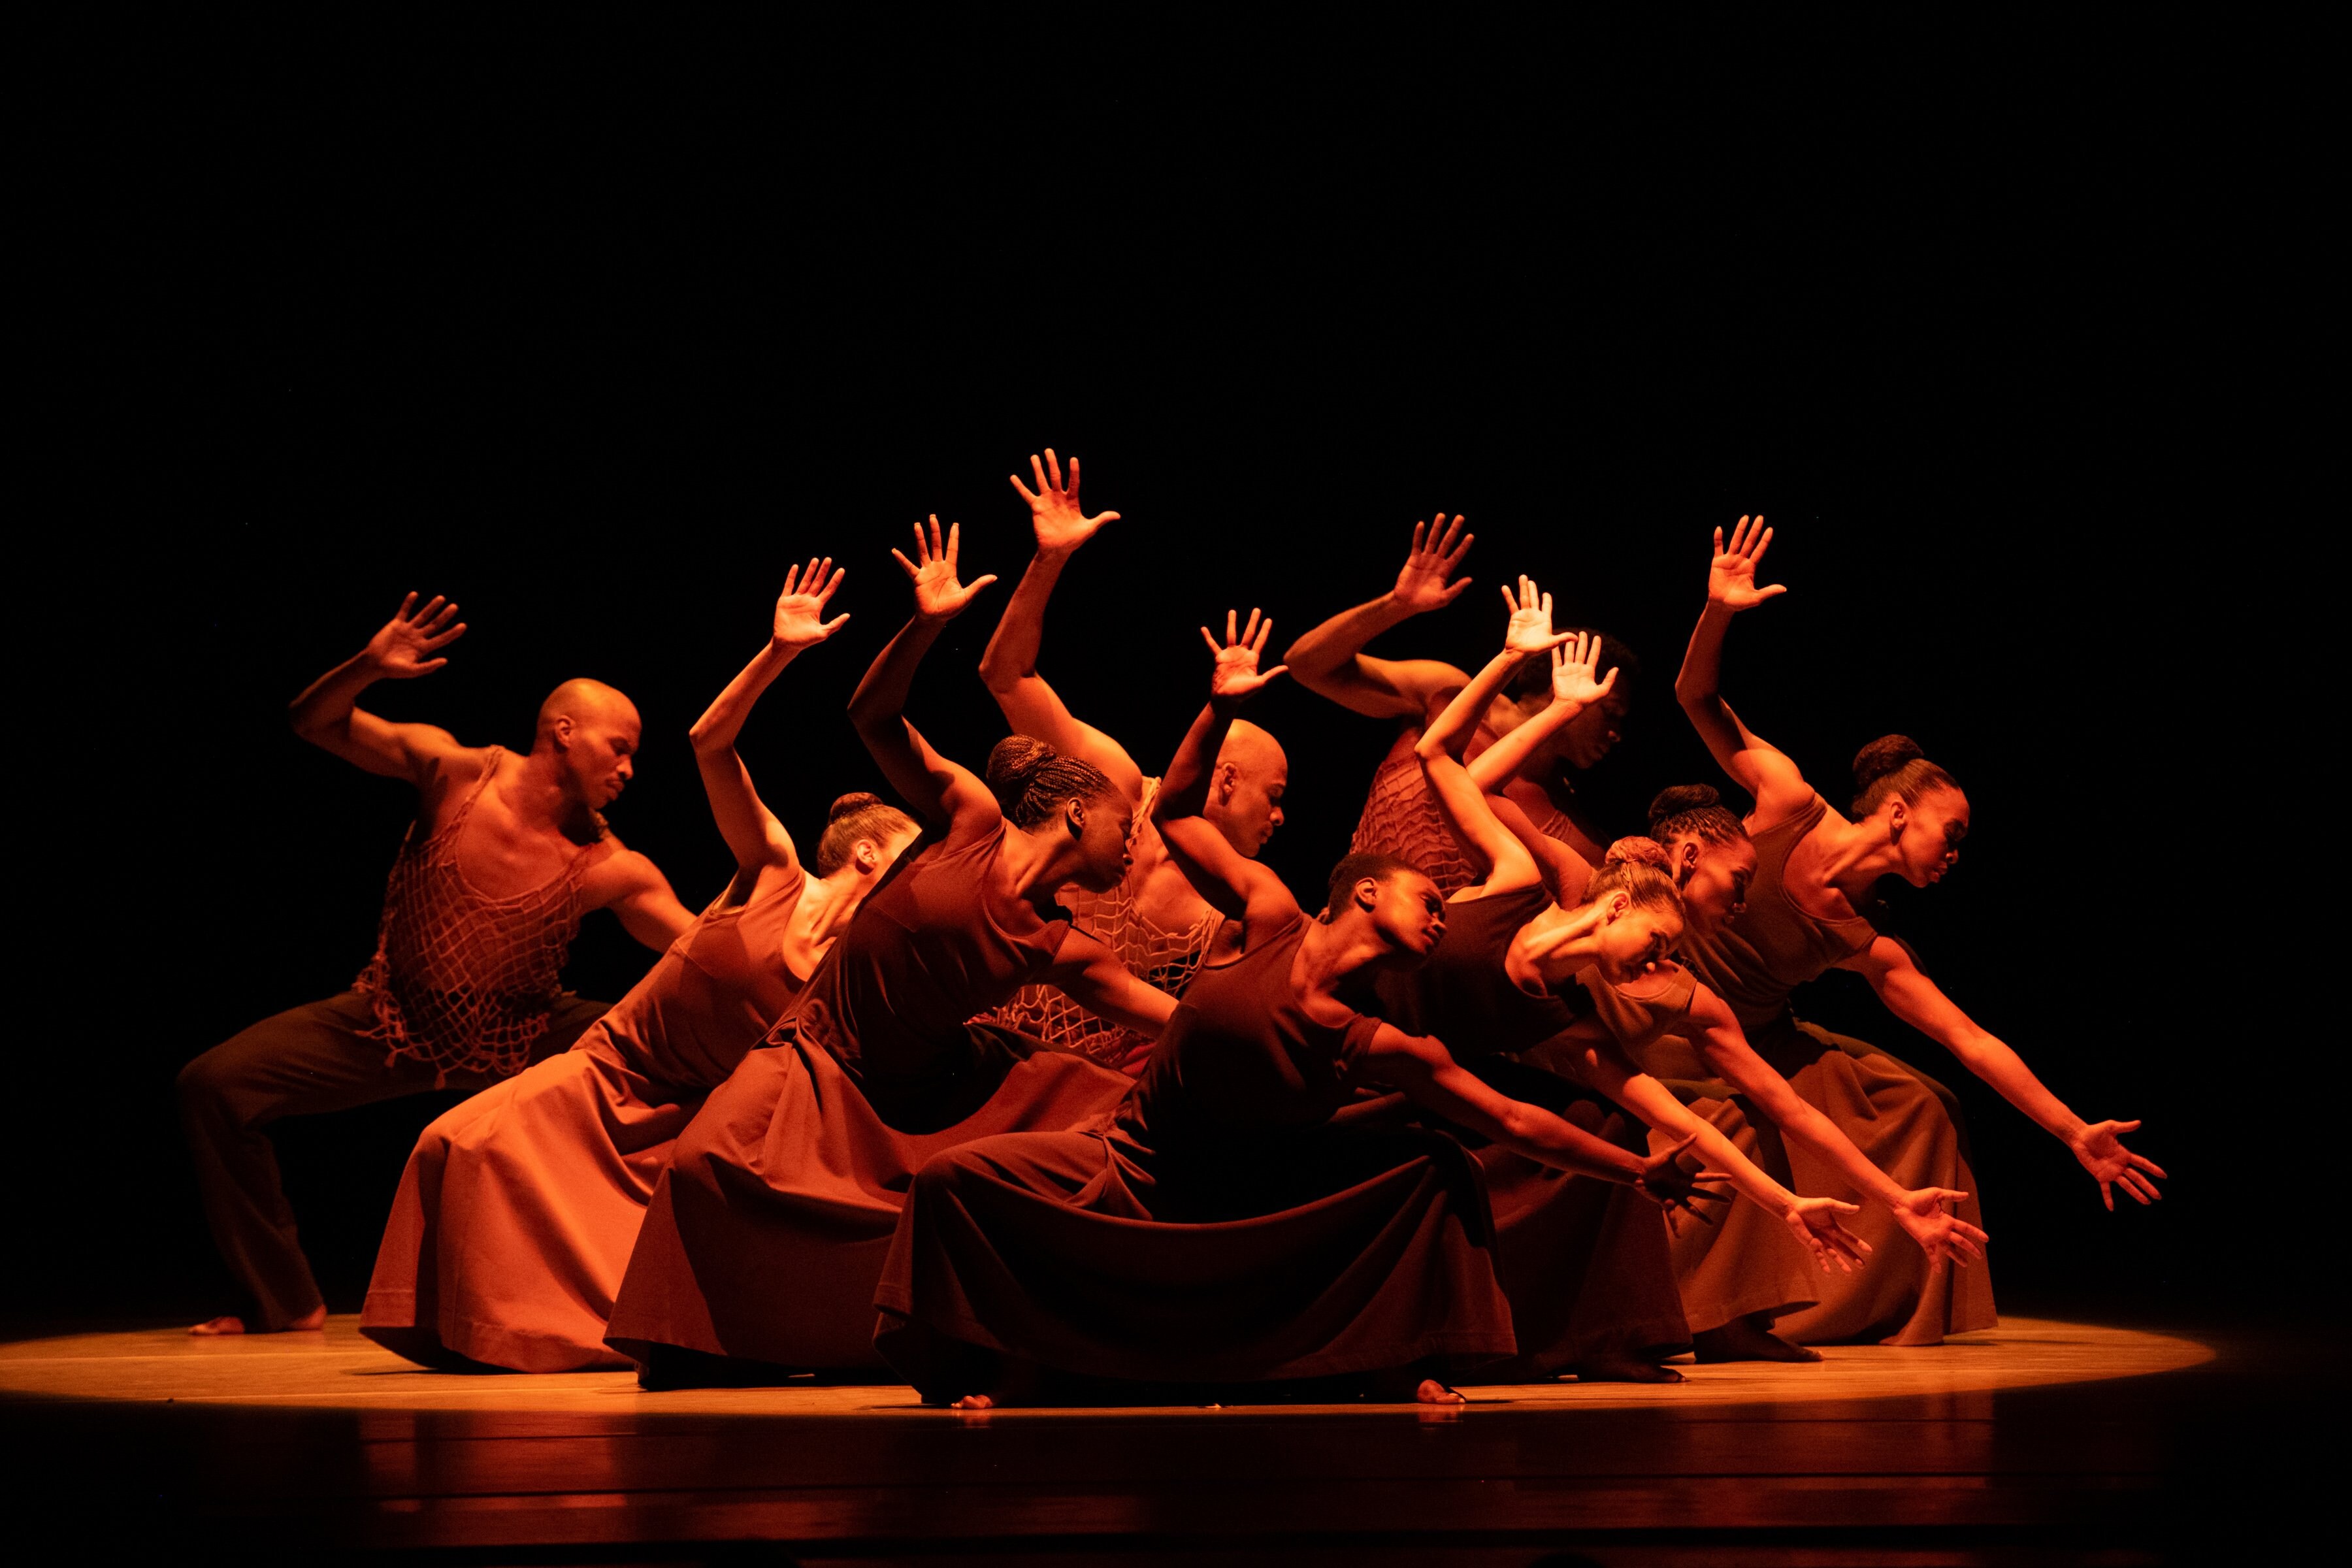 Alvin Ailey American Dance Theater - Revelations. 